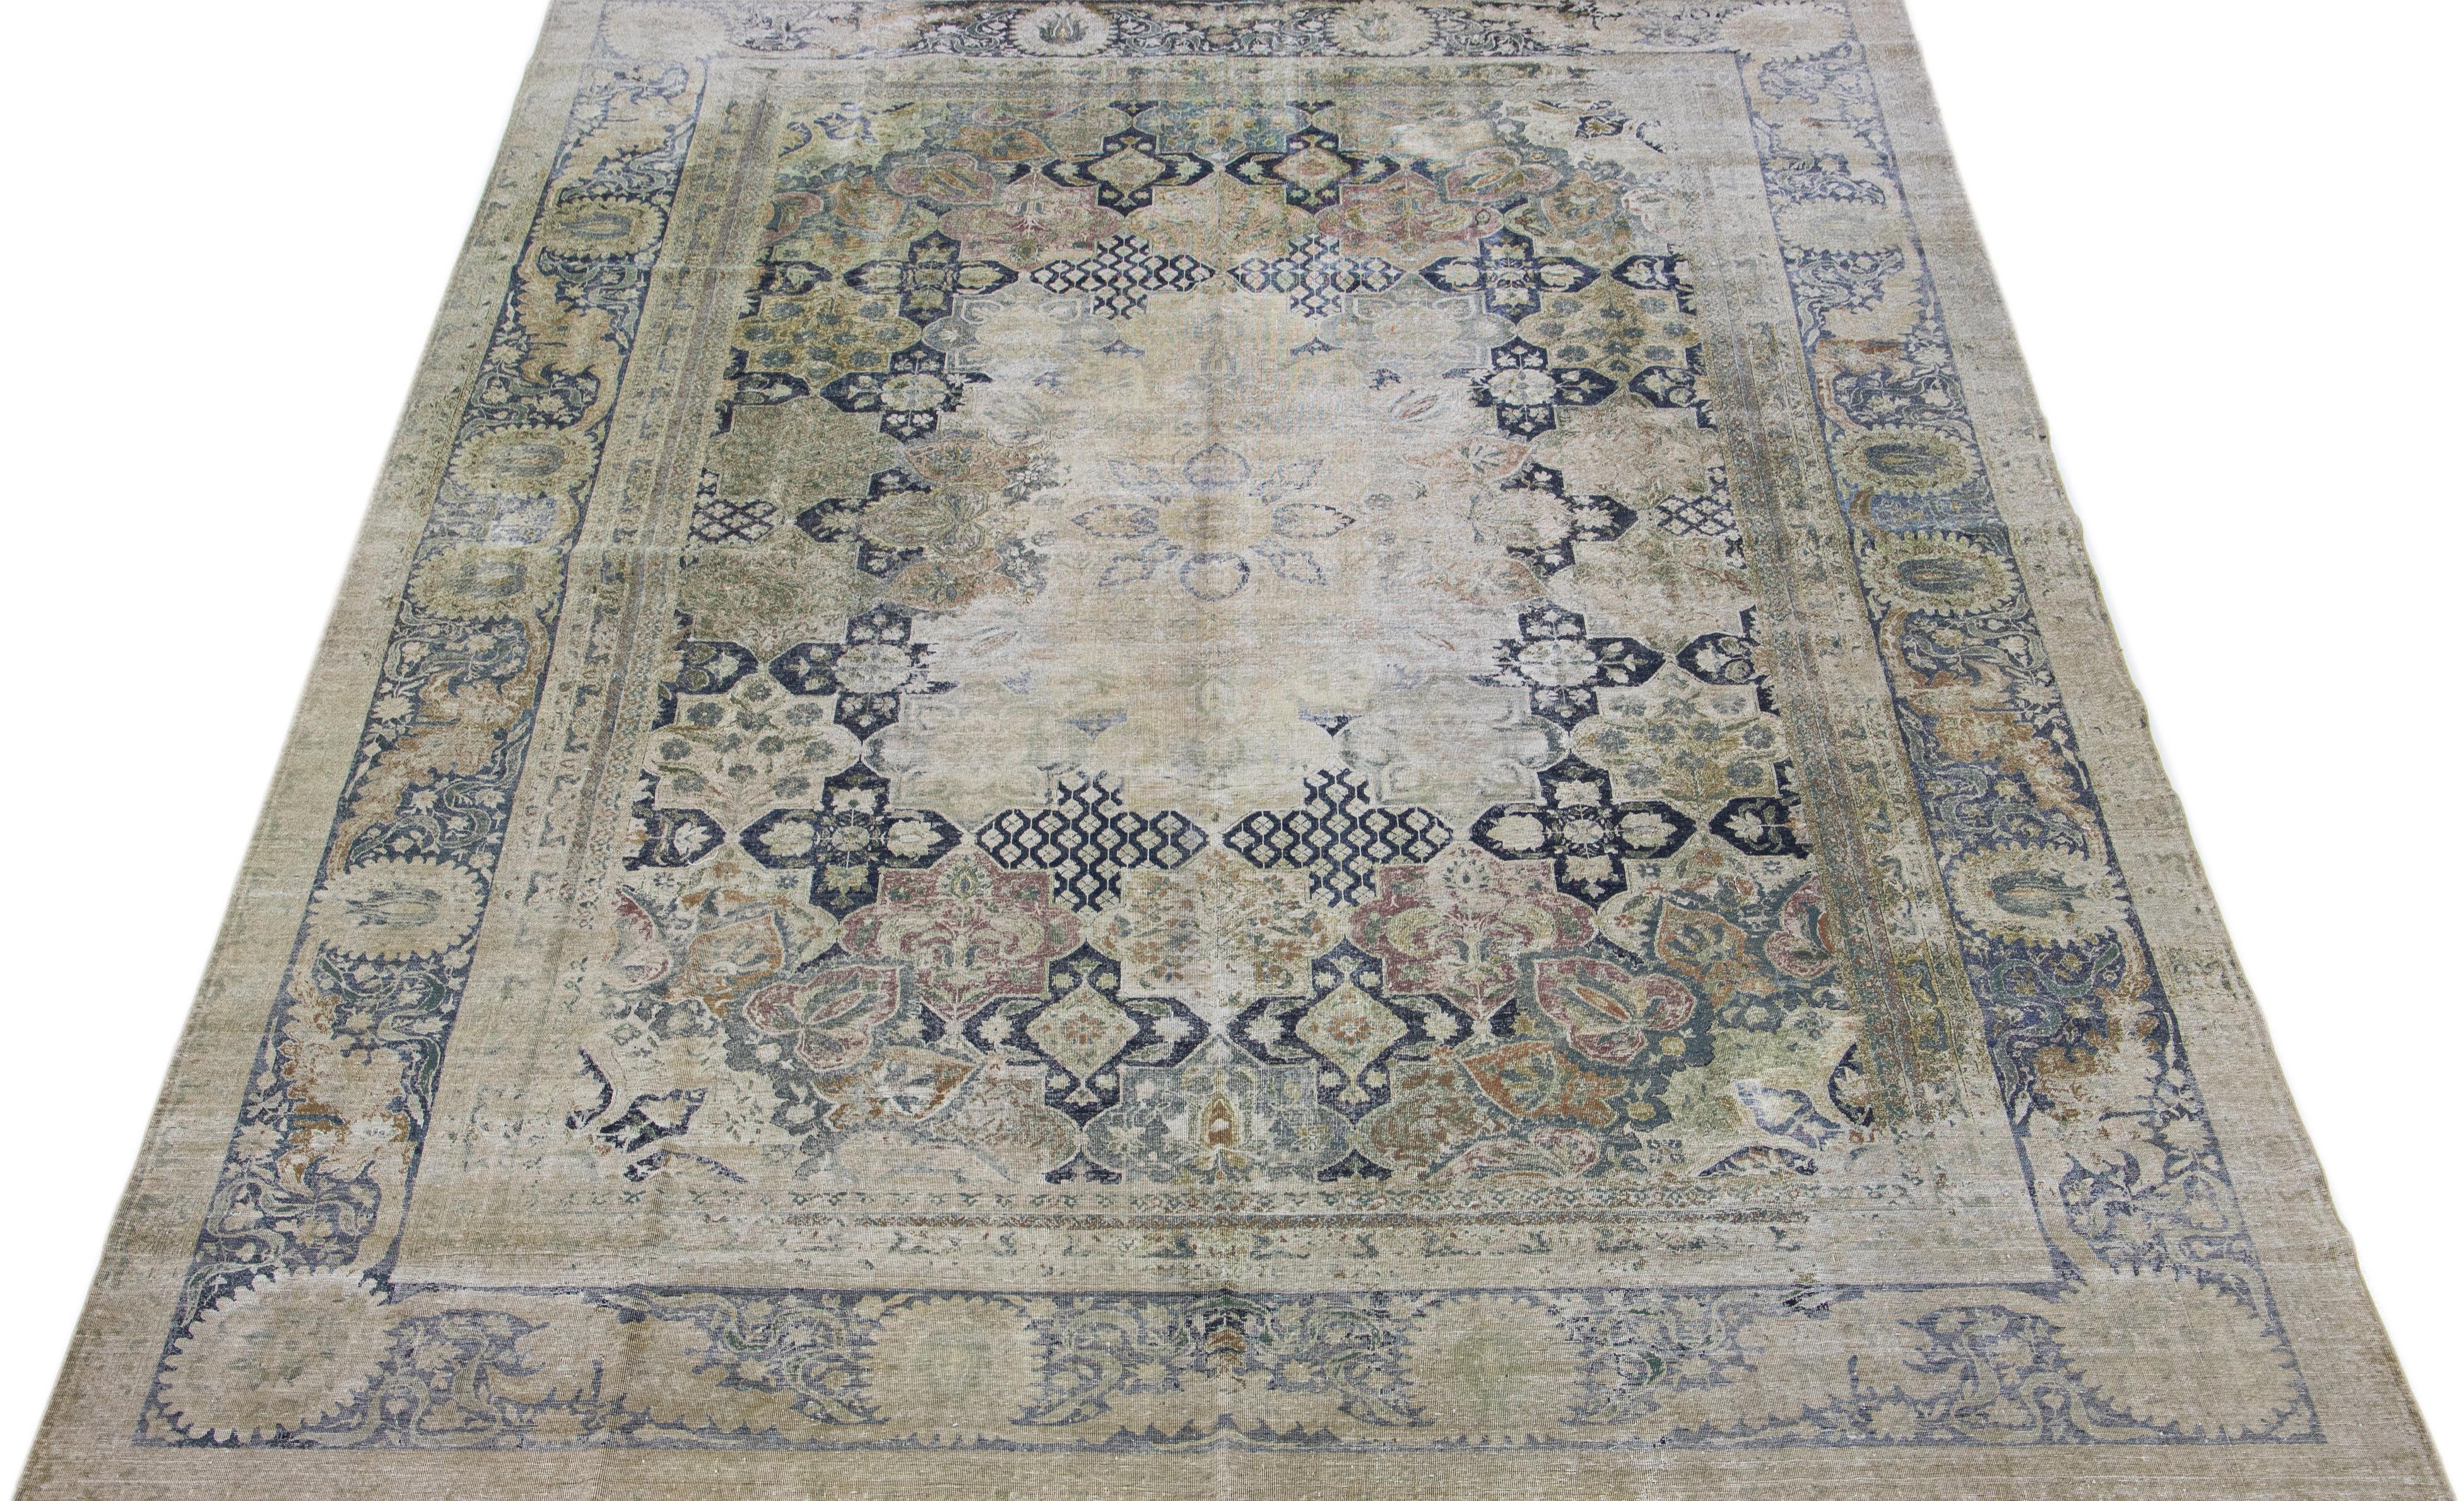 This antique Indian Larestan rug boasts a beige color field. It features exquisite, hand-knotted wool construction complemented by hints of blue, green, and brown in an all-over medallion floral pattern.

This rug measures: 10'9